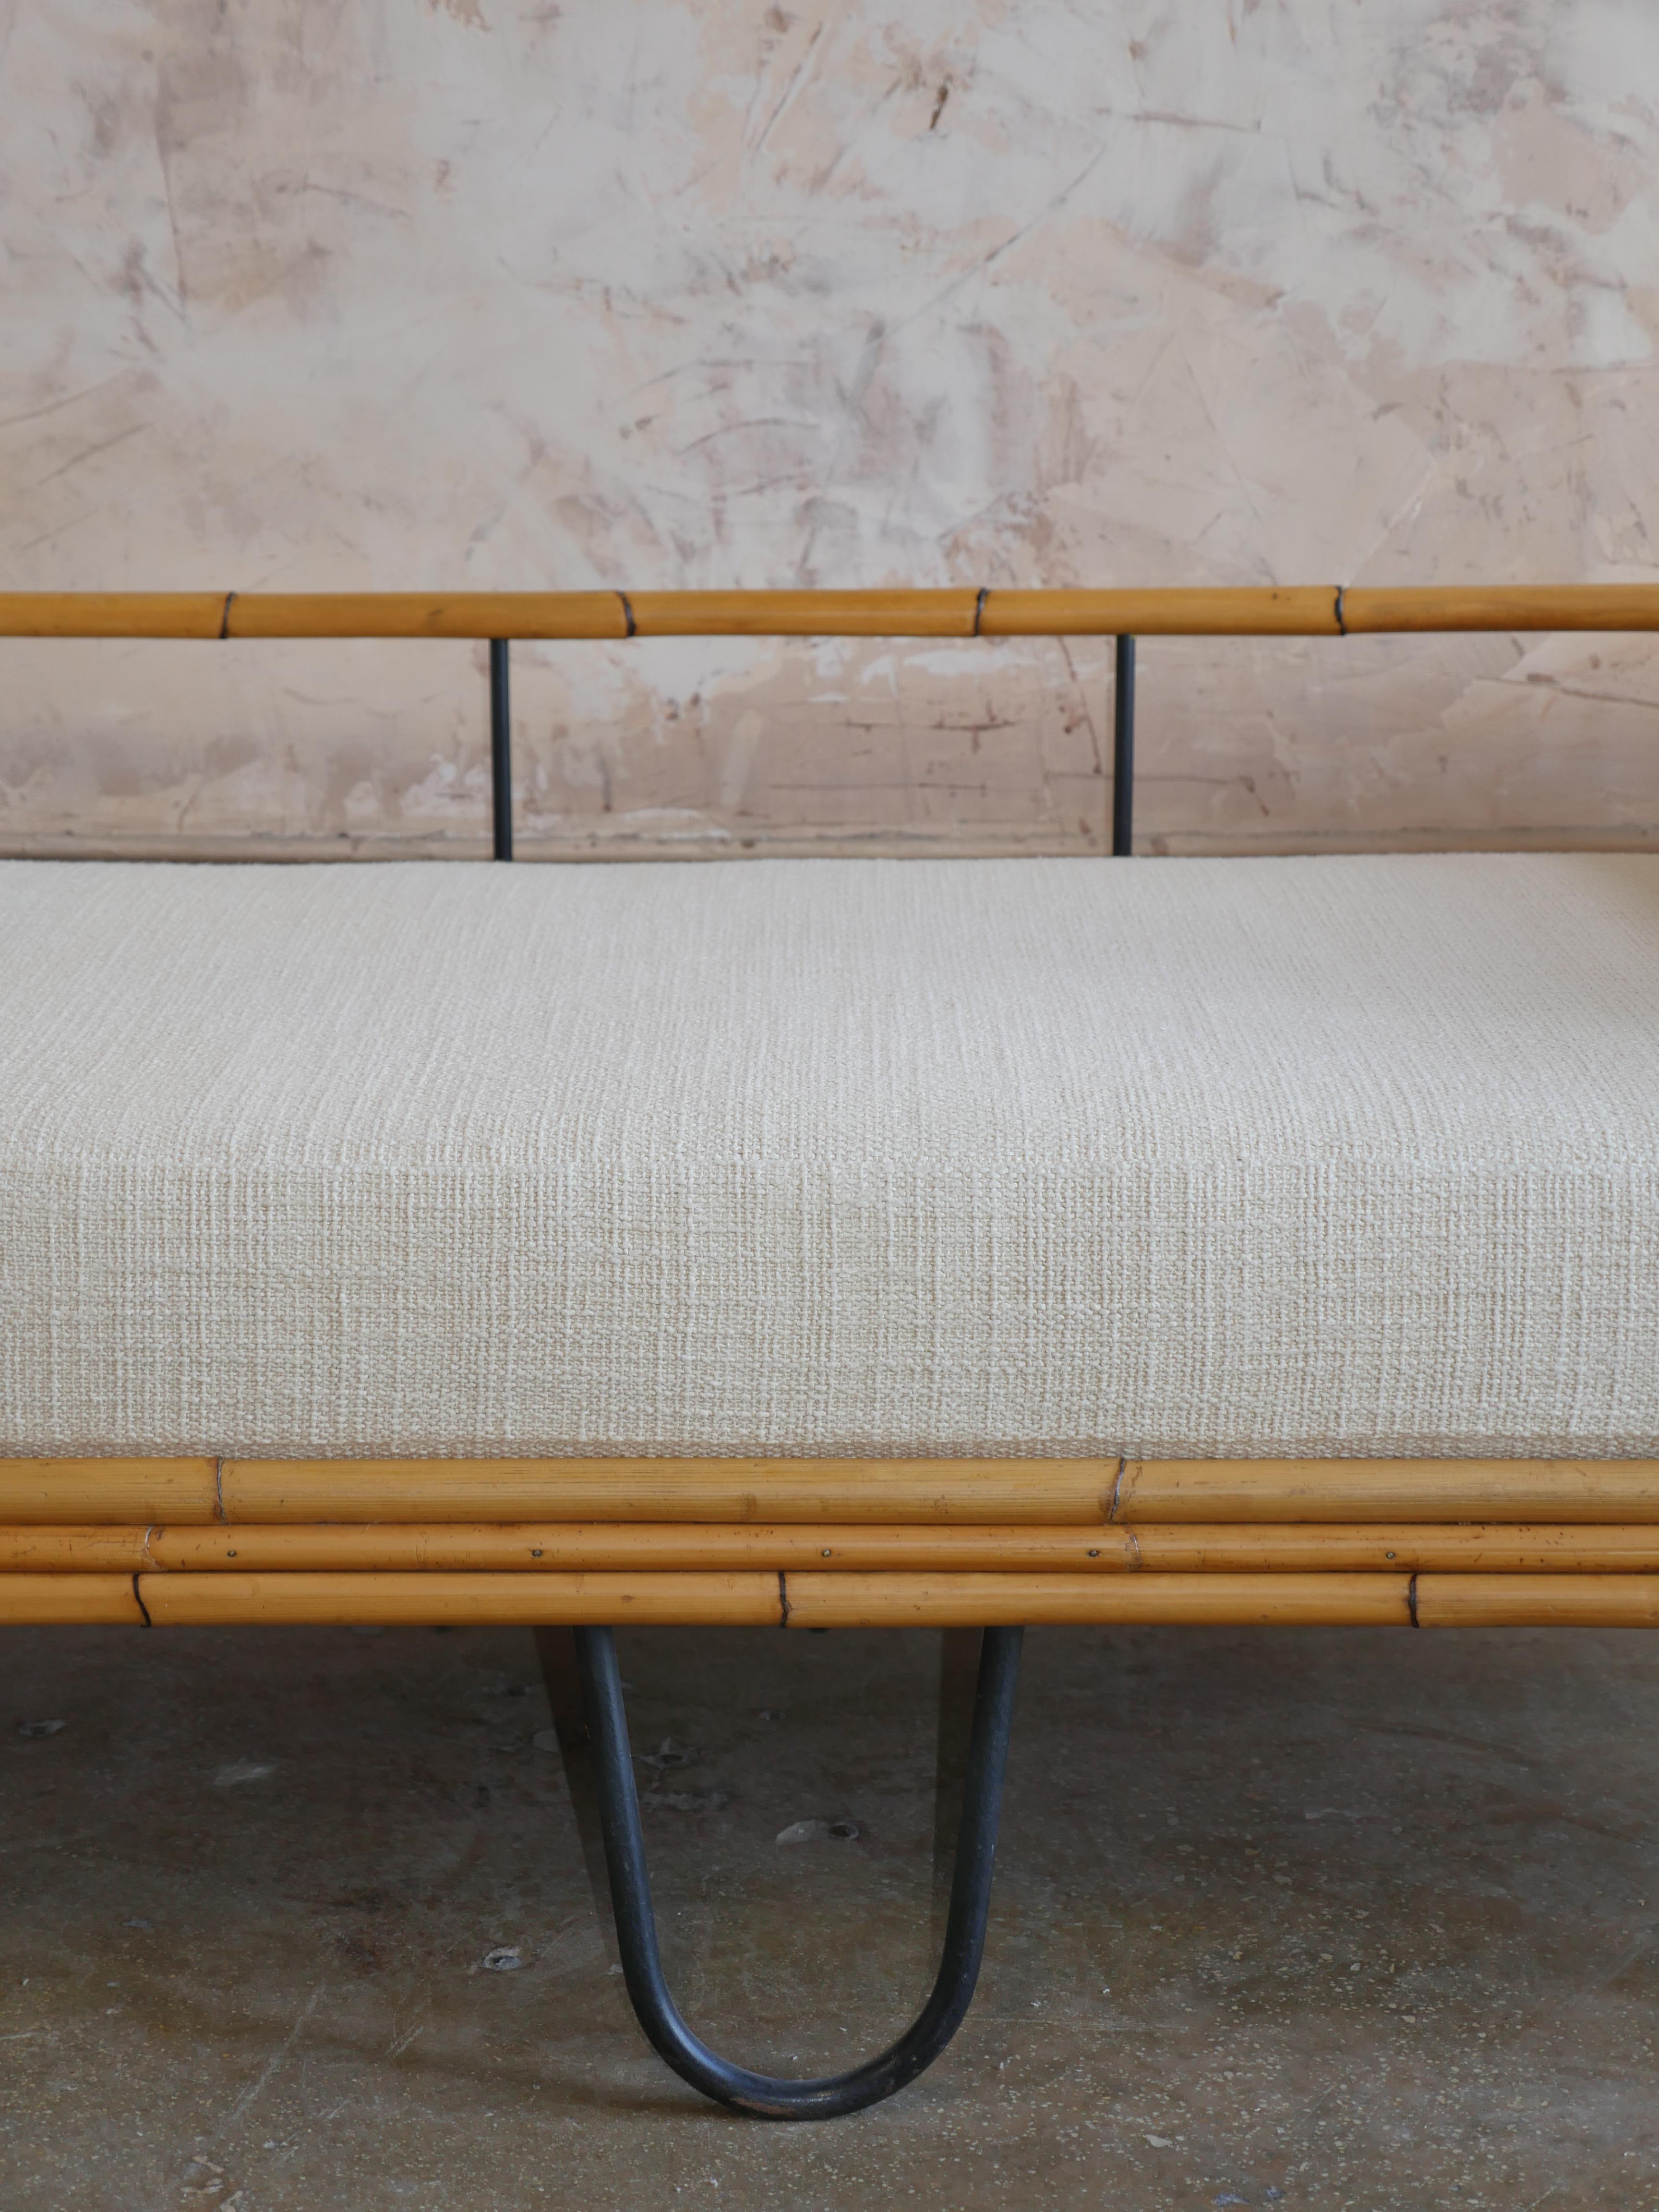 1950s Mid-Century Modern refinished bamboo and iron French daybed. We had all new cushions made, and upholstered them in a beautiful luxury linen, by Elitis. This elegant daybed has the perfect mix of old world charm and modern luxury.